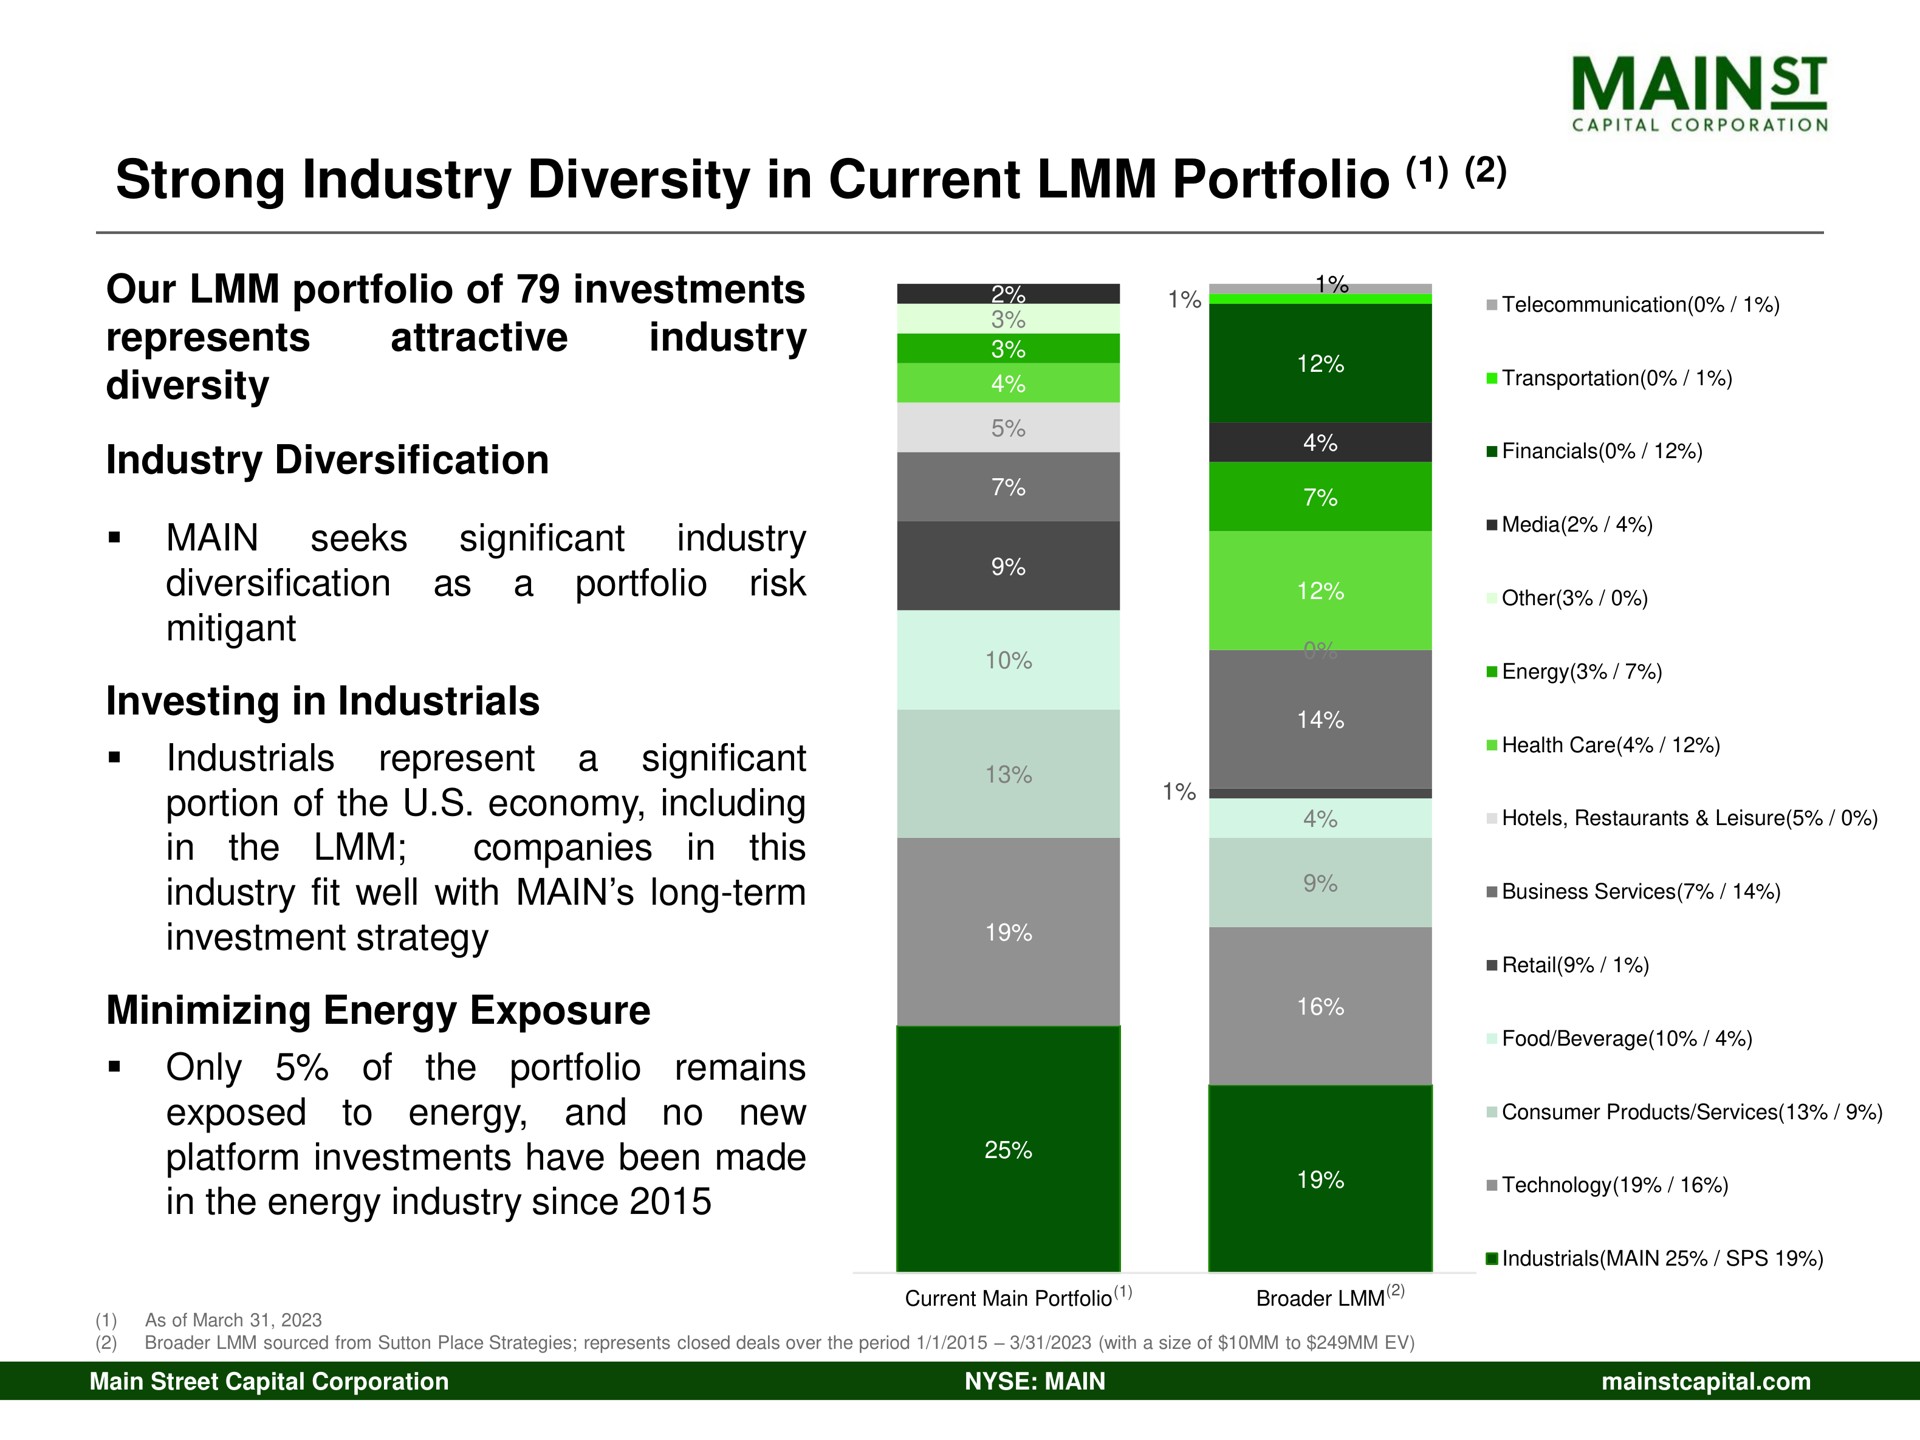 strong industry diversity in current portfolio | Main Street Capital